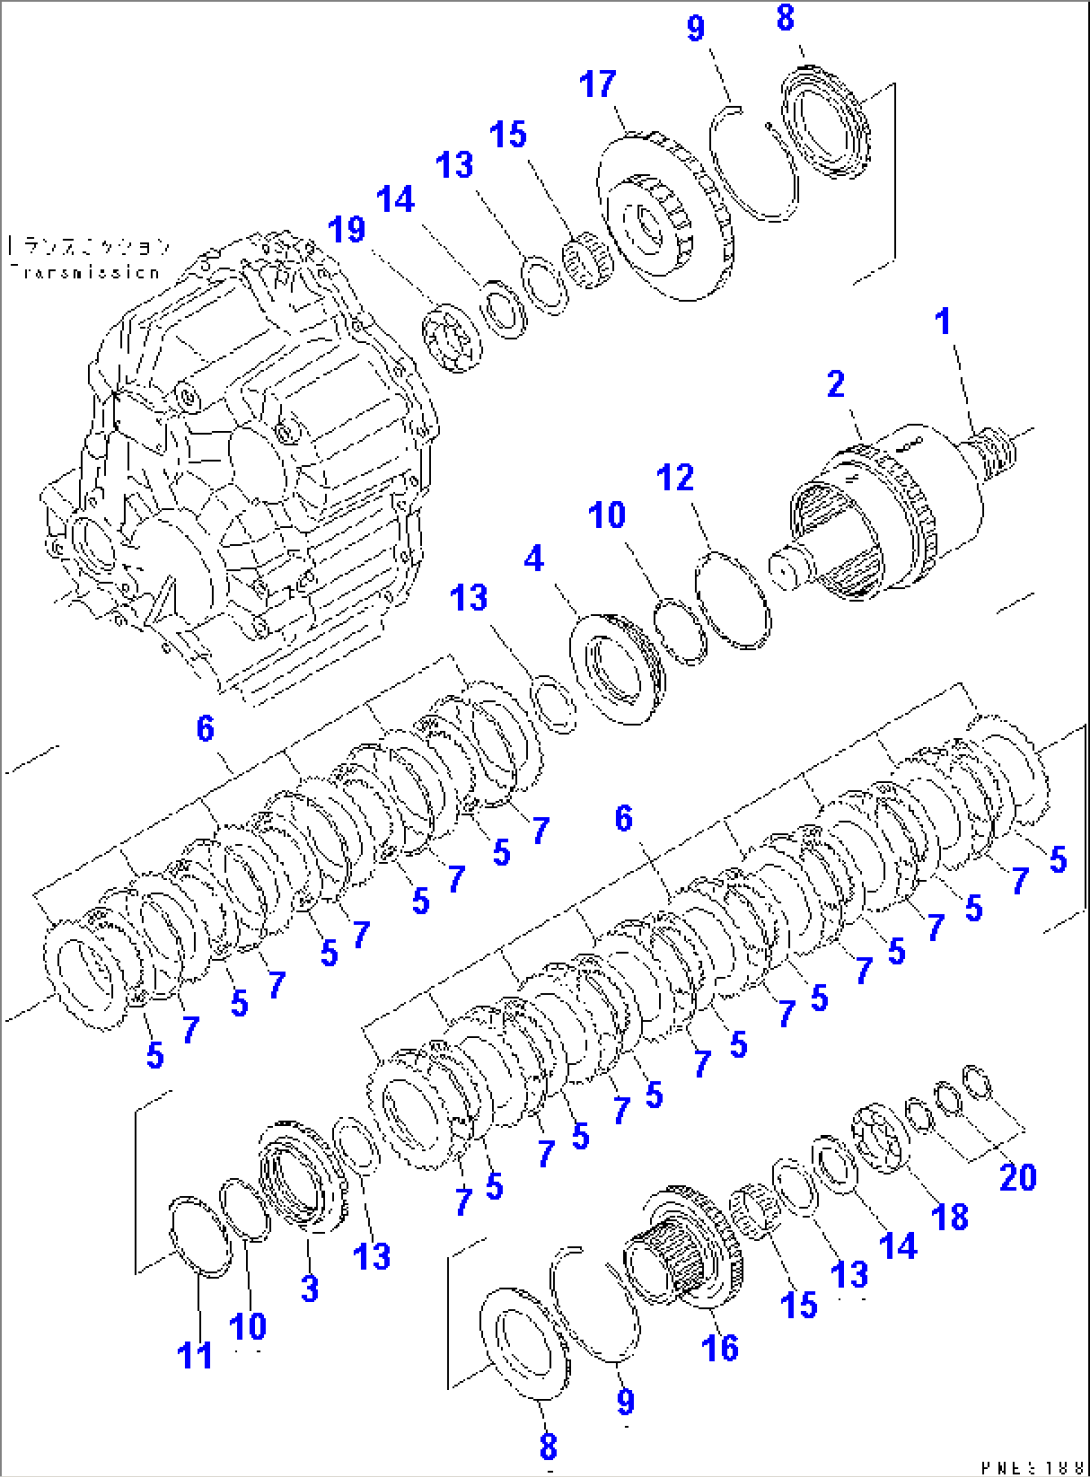 TRANSMISSION (FORWARD AND 2ND CLUTCH)